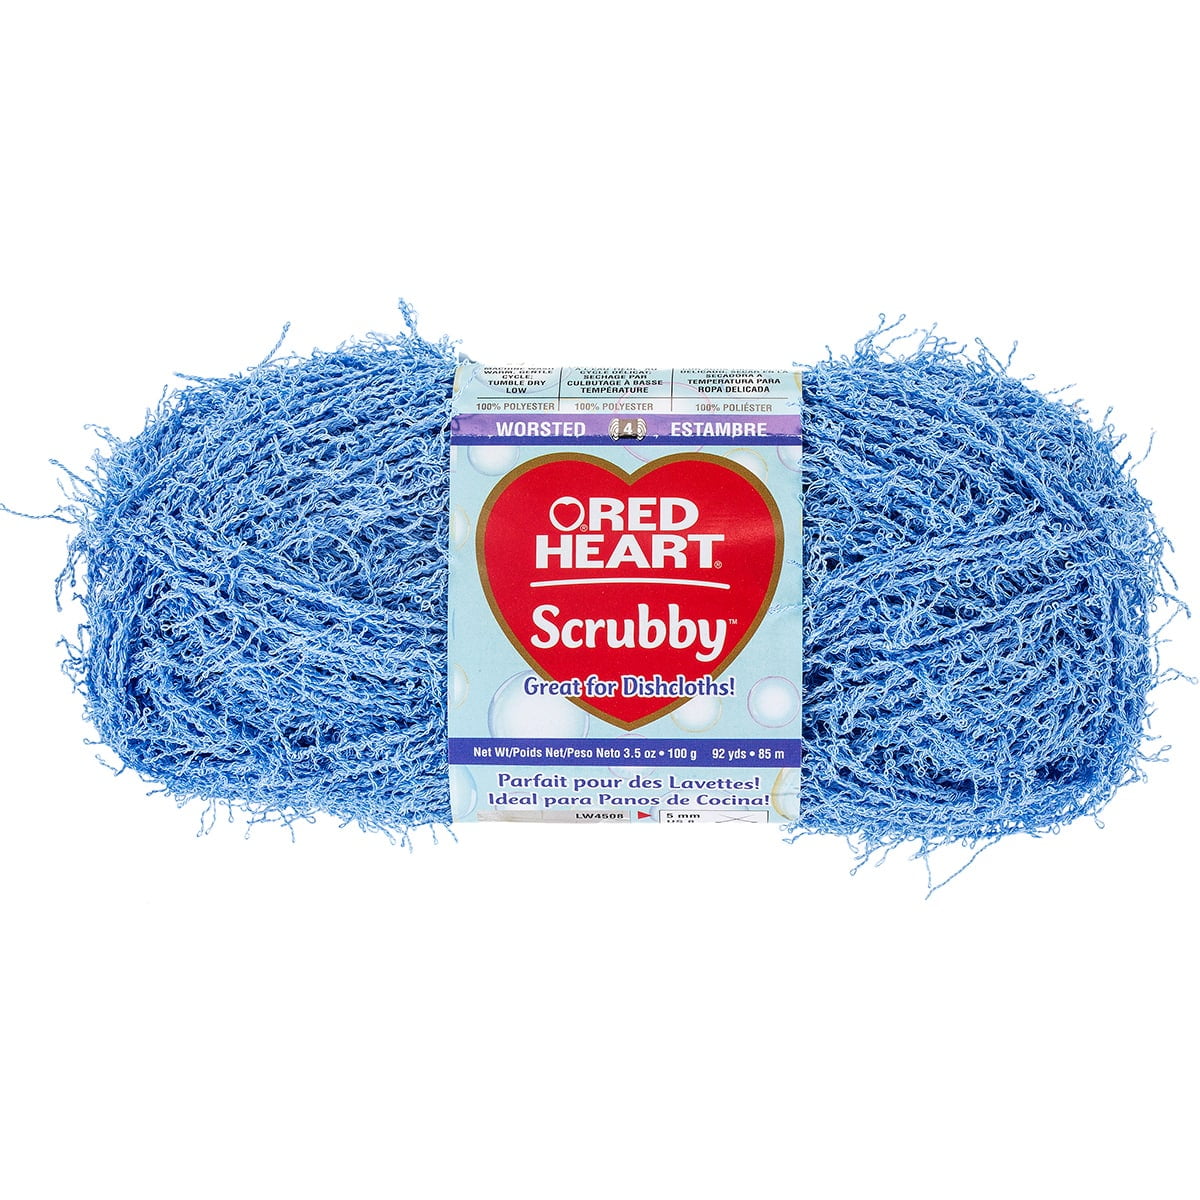 Red Heart Scrubby Yarn for Dishcloths, Destash Polyester Worsted Kitchen  Yarn, Multiple Colors Available, Gift for Crafts Crochet Knit 